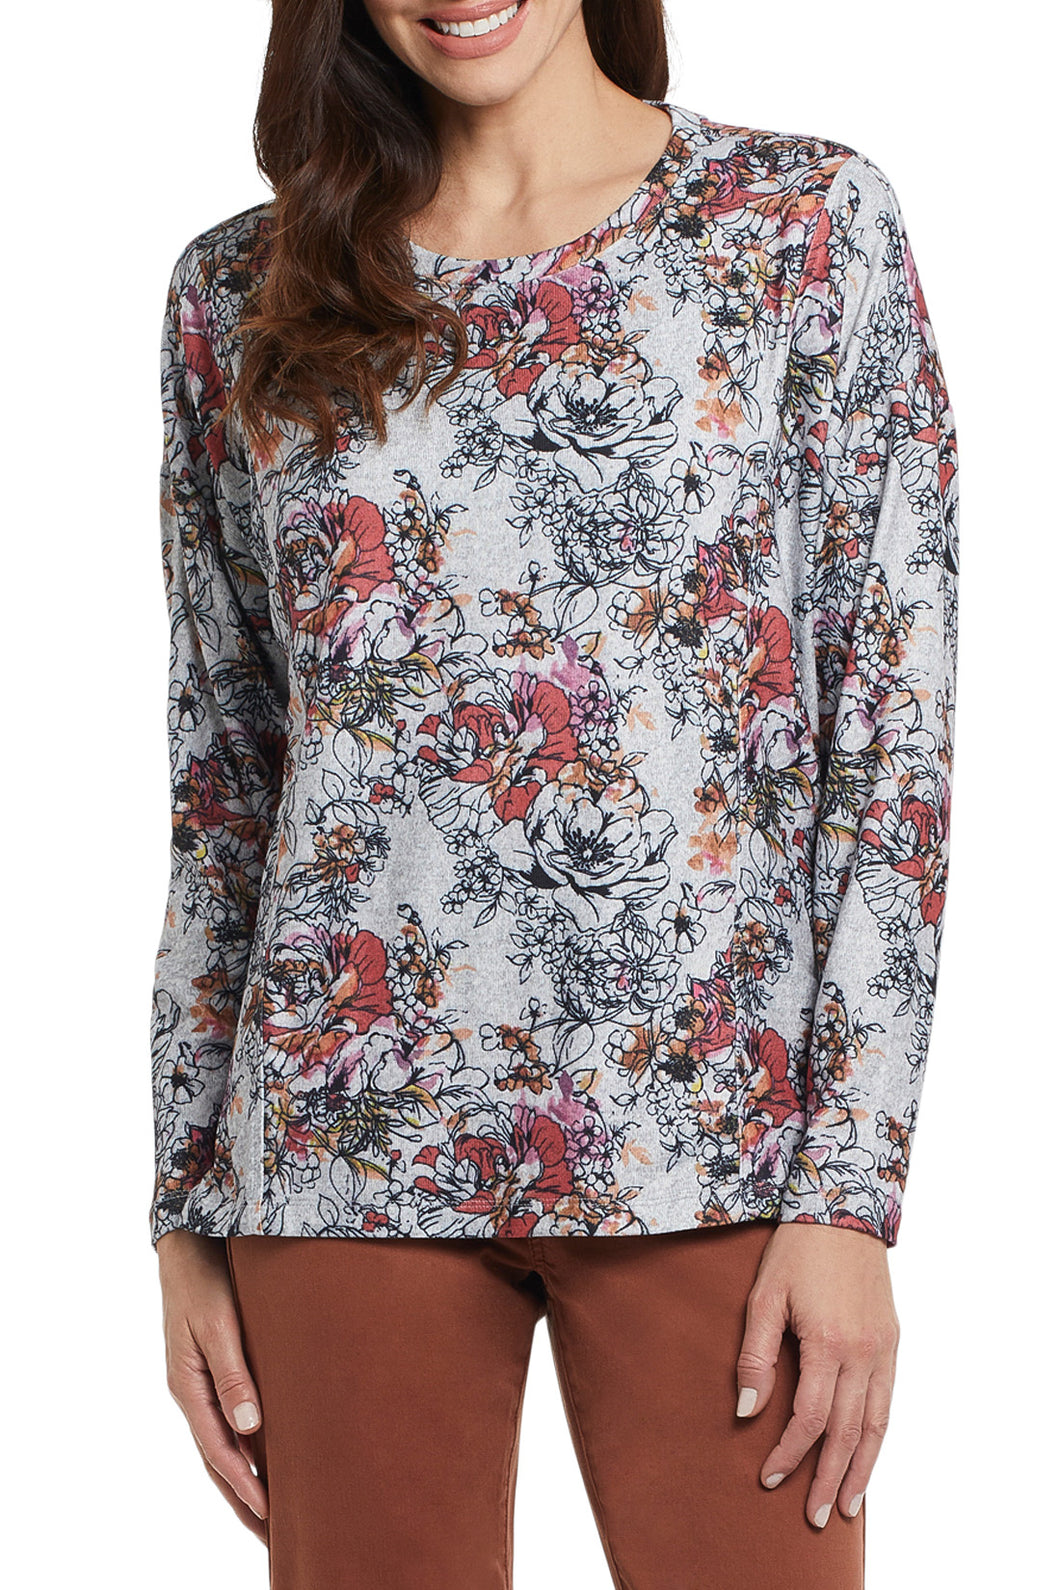 A perfect soft and cozy long sleeve top is one you'll want to add to your closet as it goes with so many different bottoms.  With its vintage feel floral design and beautiful combination of colors, this top can be dressed up with a skirt, or paired with your favorite leggings for a more casual look.  